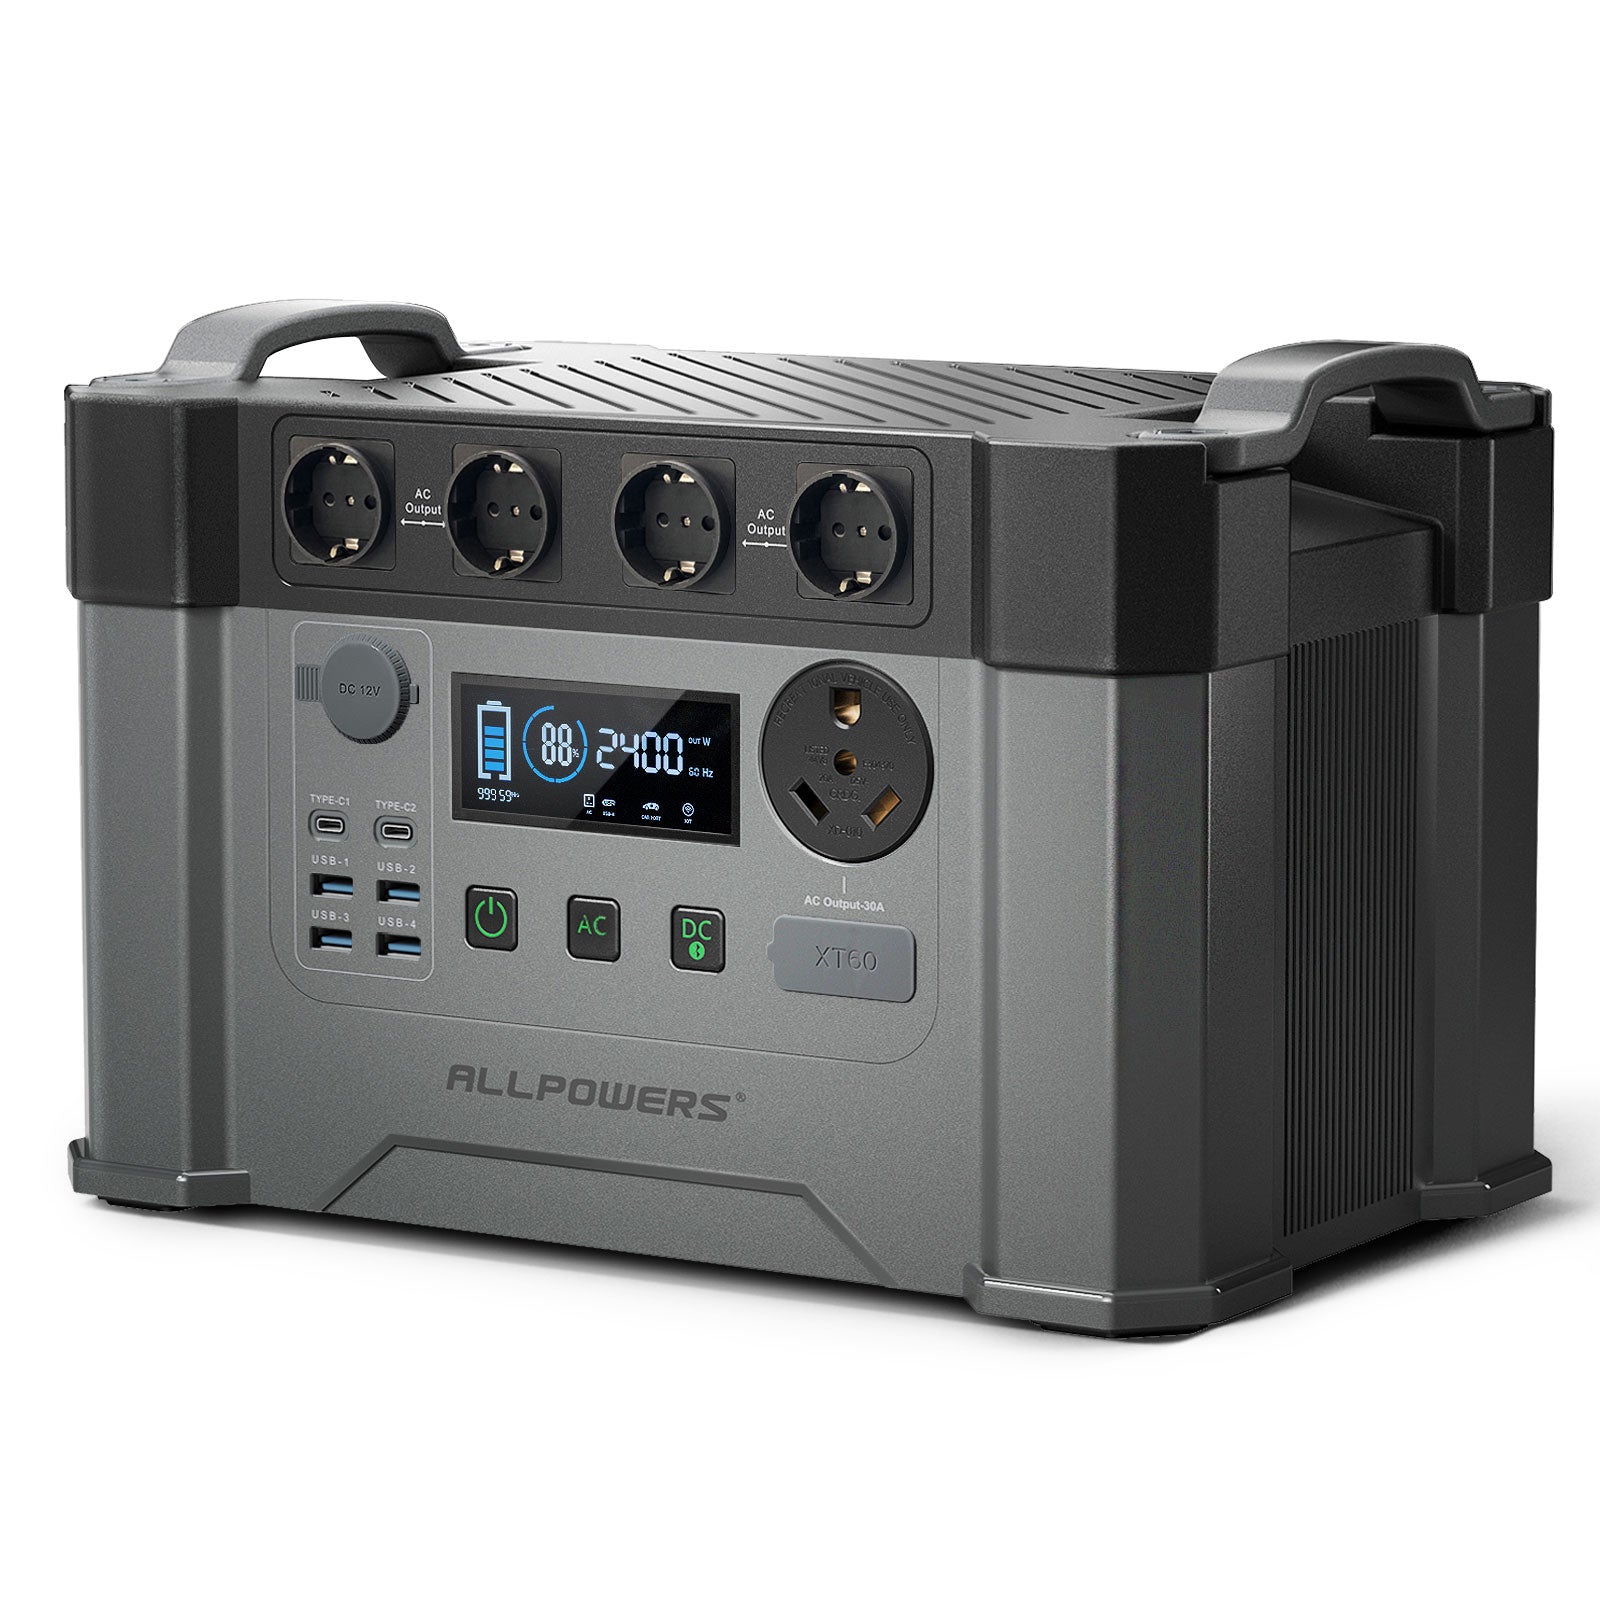 ALLPOWERS S2000 Pro Portable Power Station | 2400W 1500Wh